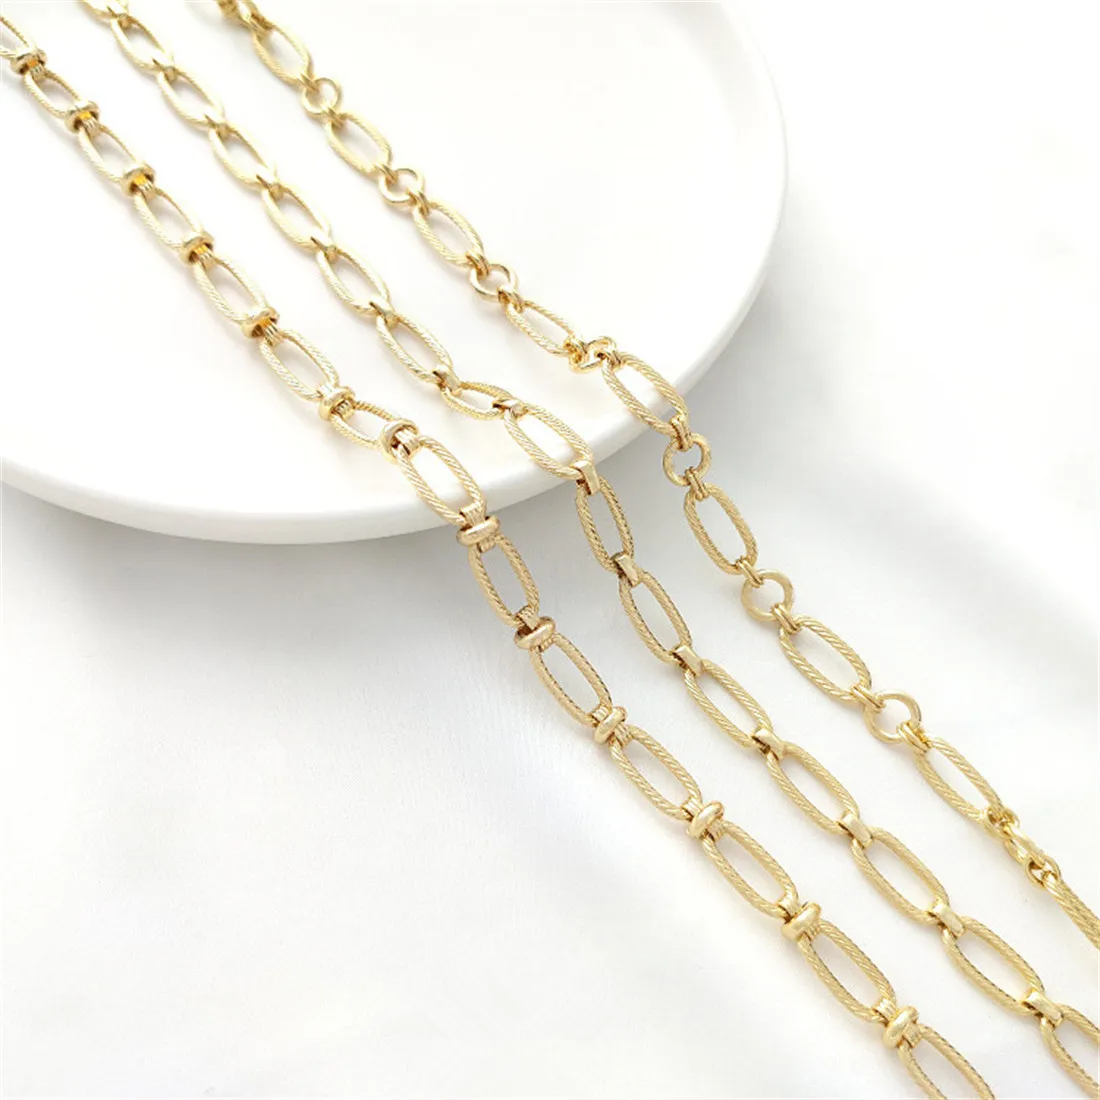 14K Gold Wrapped Oval Fried Dough Twists Chain Manual Long O-ring Chain Diy Bracelet Necklace Jewelry Hand Made Loose Chain B671 hand jewelry holder display shelf bracelet mannequin necklace stand for manual ring